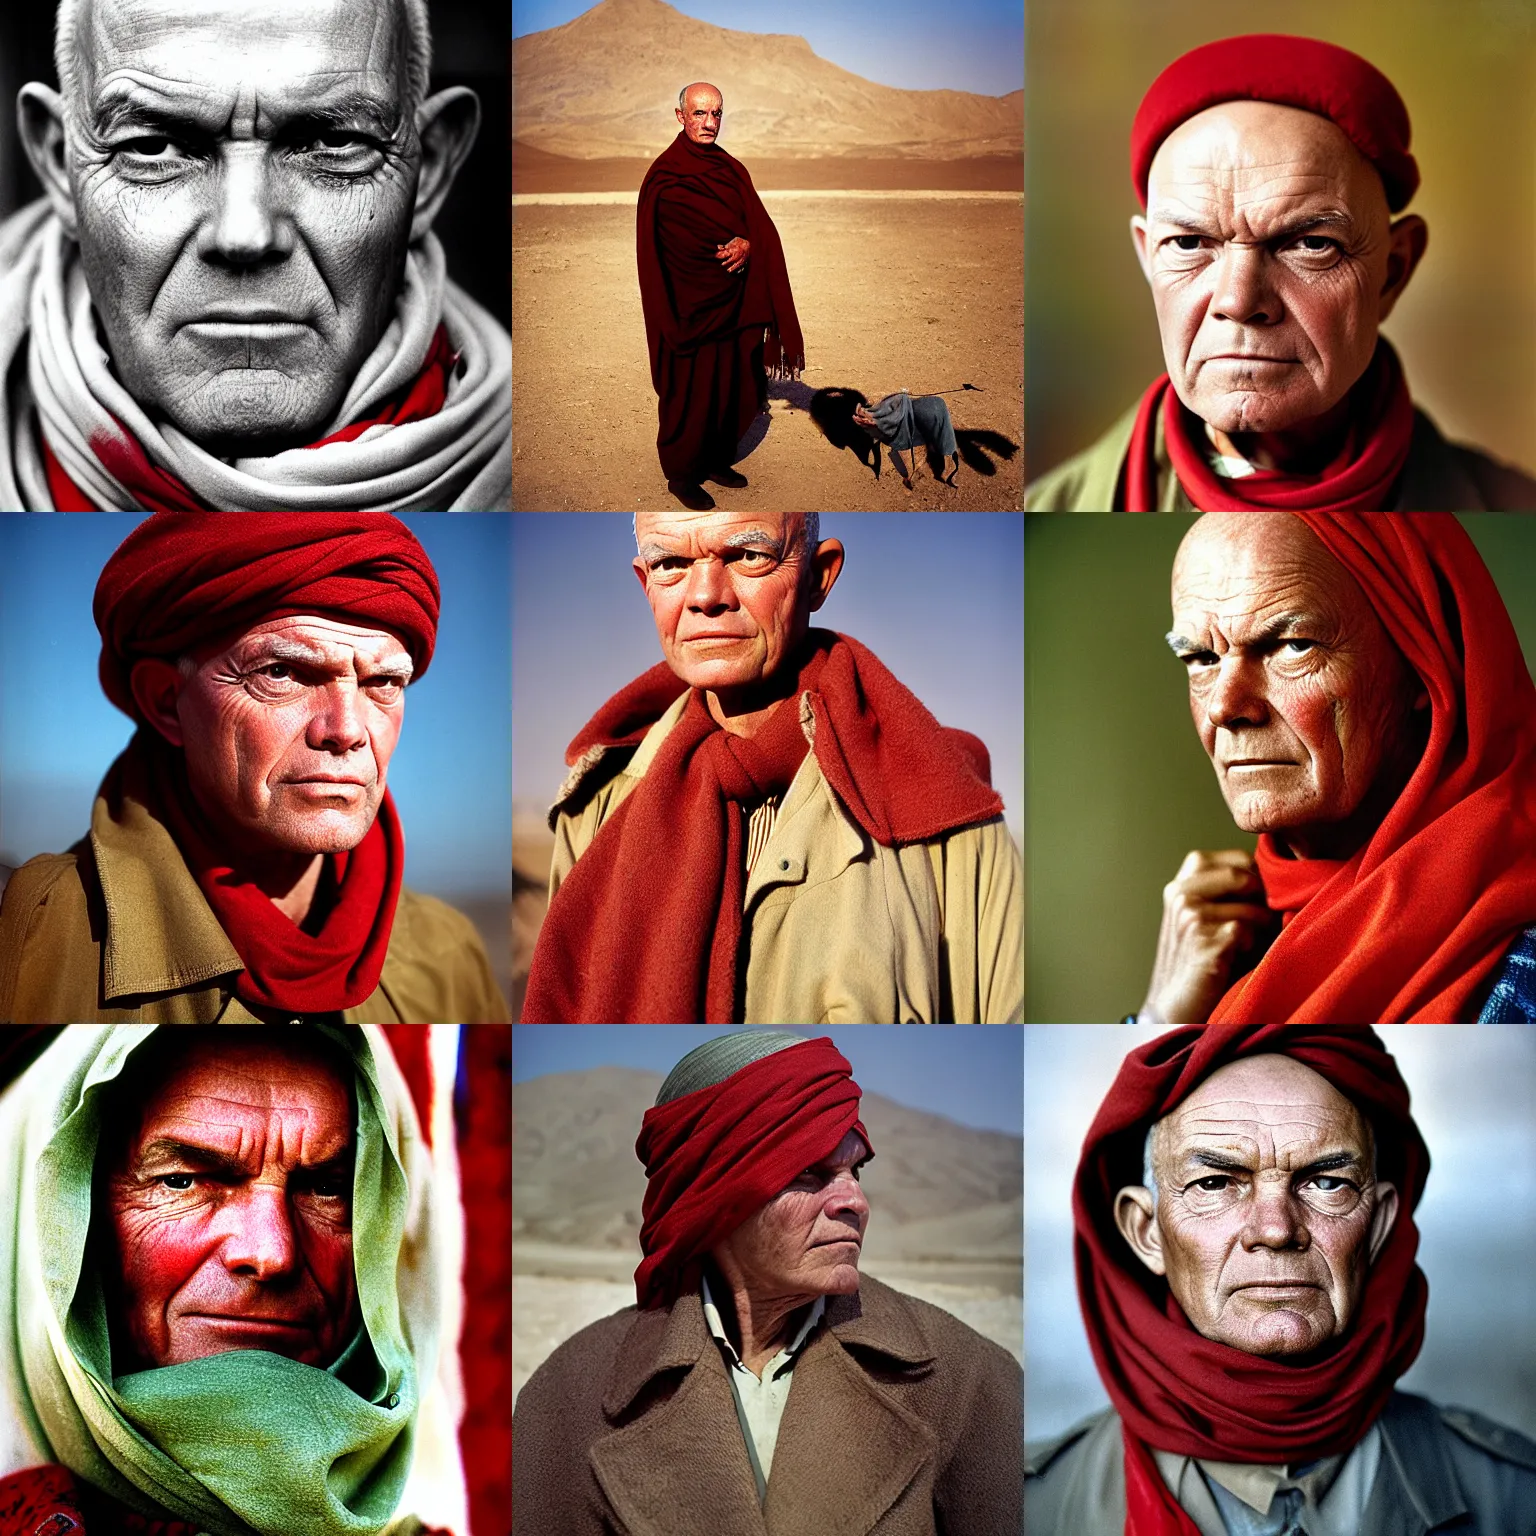 Prompt: portrait of president dwight eisenhower as afghan man, green eyes and red scarf looking intently, photograph by steve mccurry